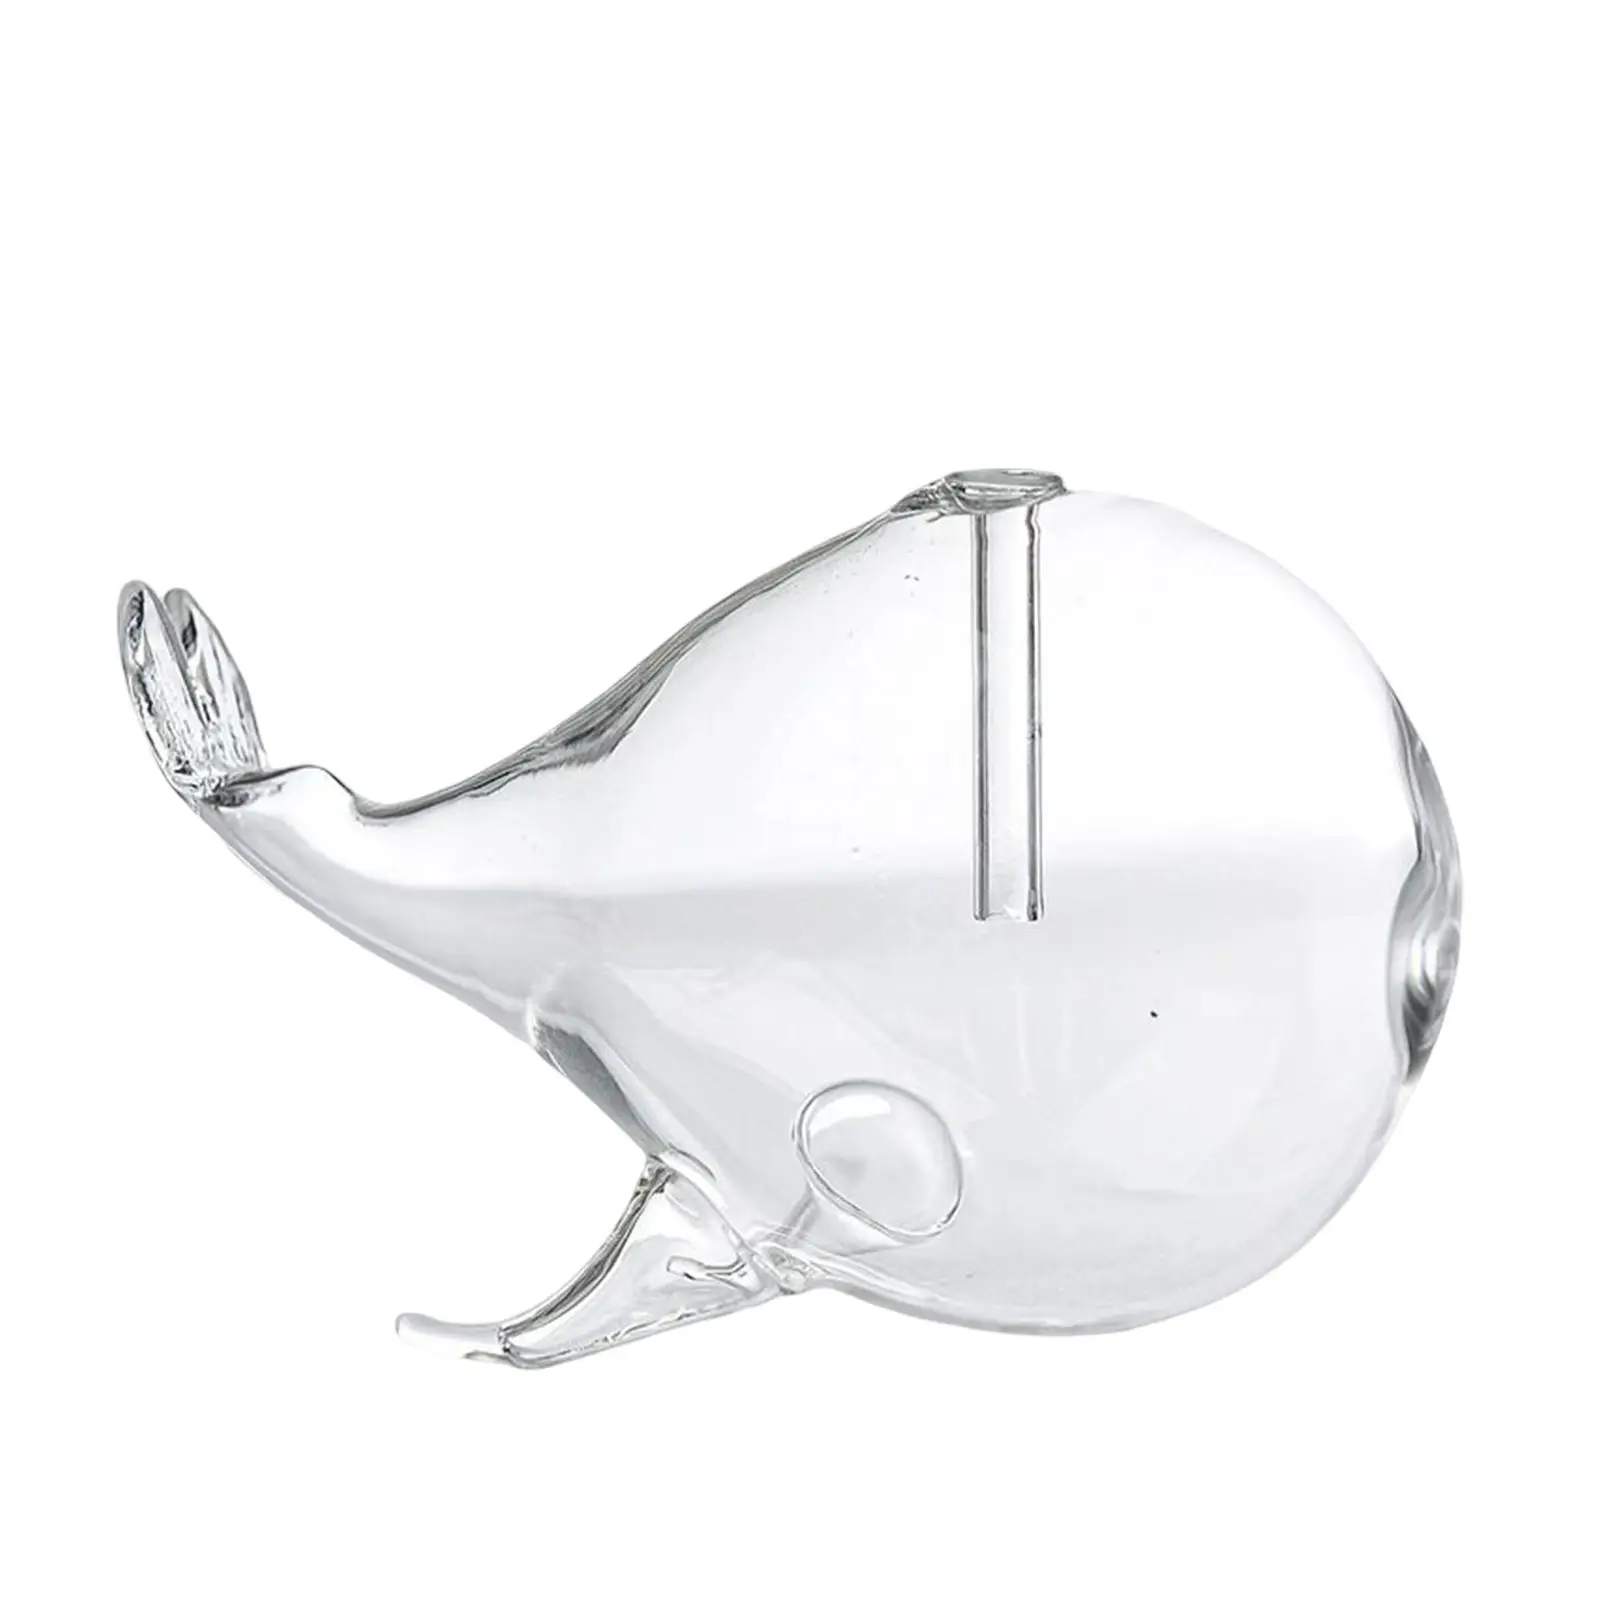 Classic Oil Lamp Whale Design Crafts for Household Bedroom Housewarming